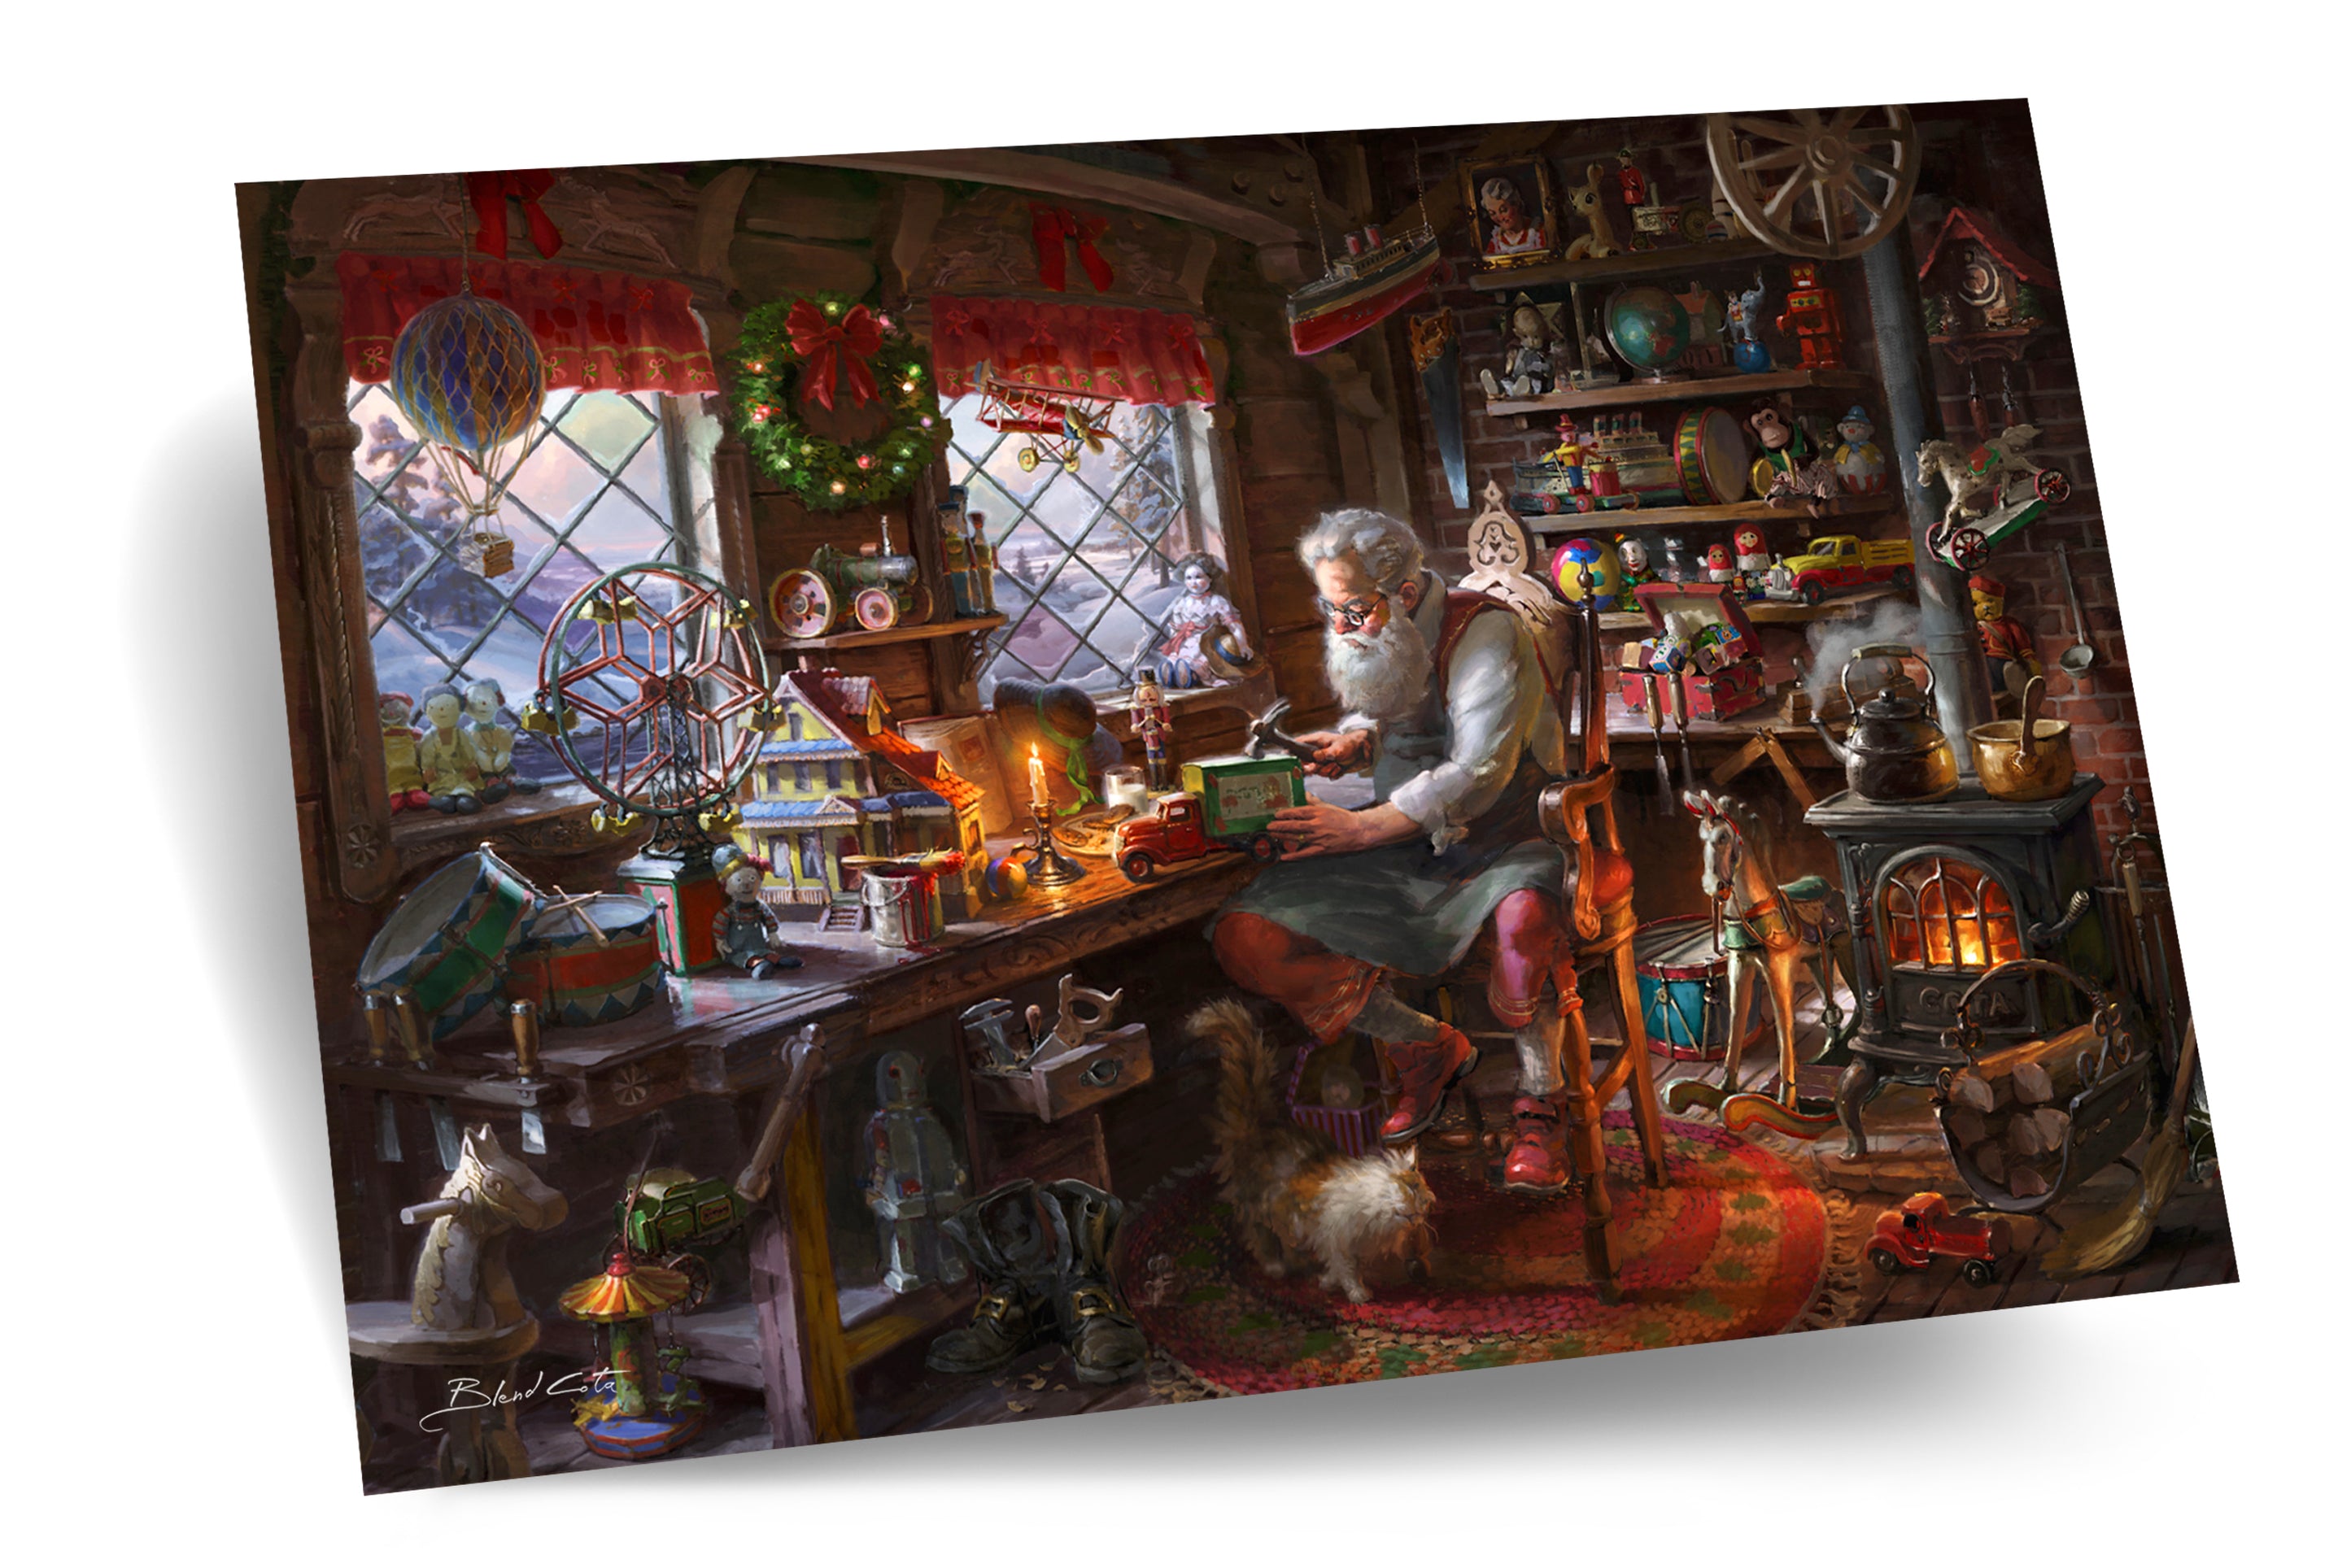 An art print on paper cardstock of the painting of Santa claus making toys in his workshop  during christmas with a cat by his boots and wood burning stove amongst the many children's toys.